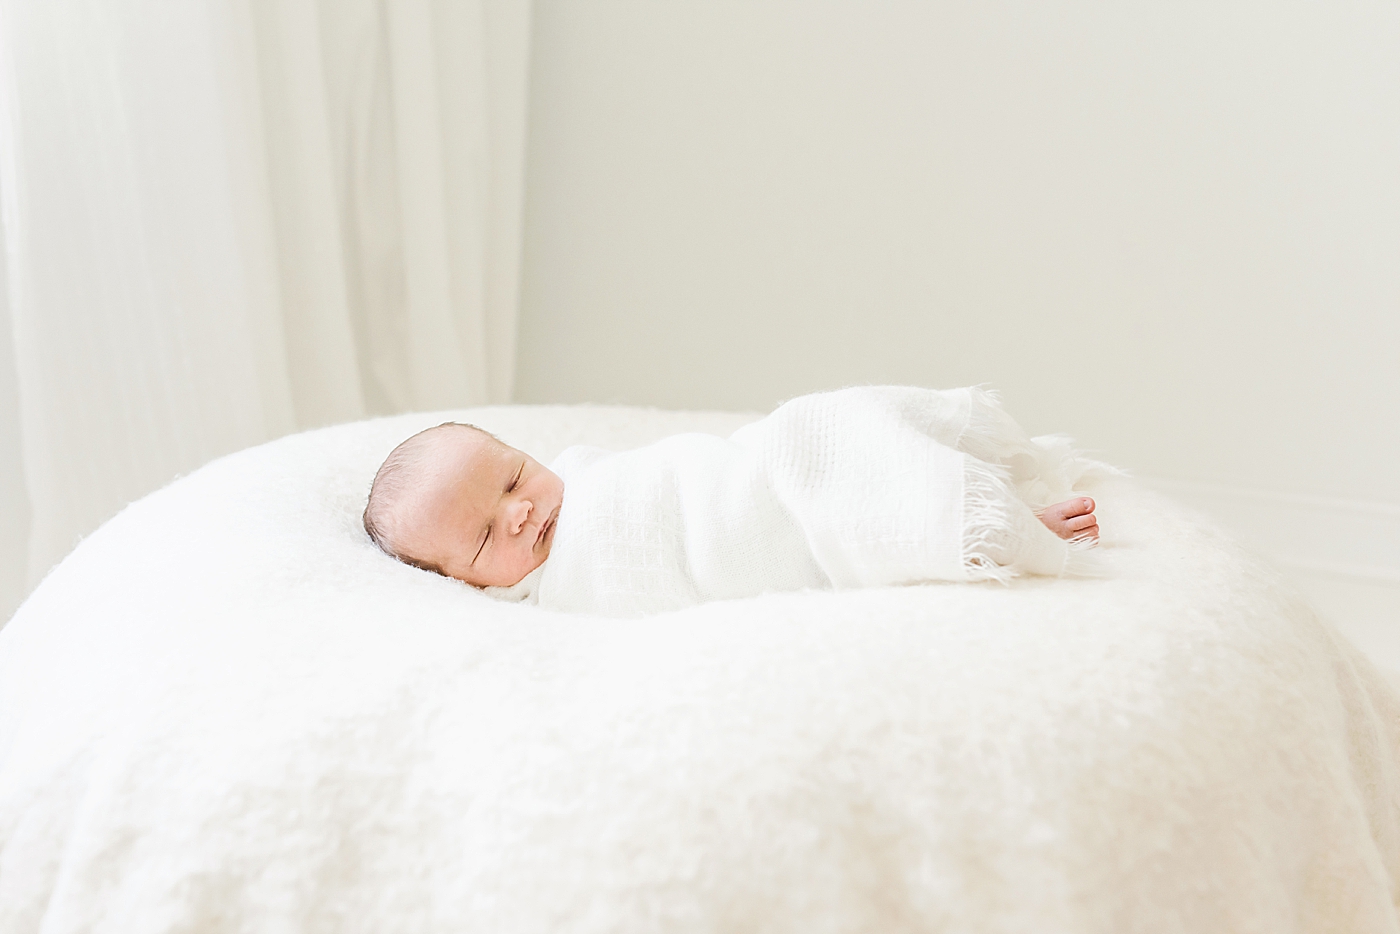 Sleeping newborn wrapped in white swaddle | Photo by Anna Wisjo Photography